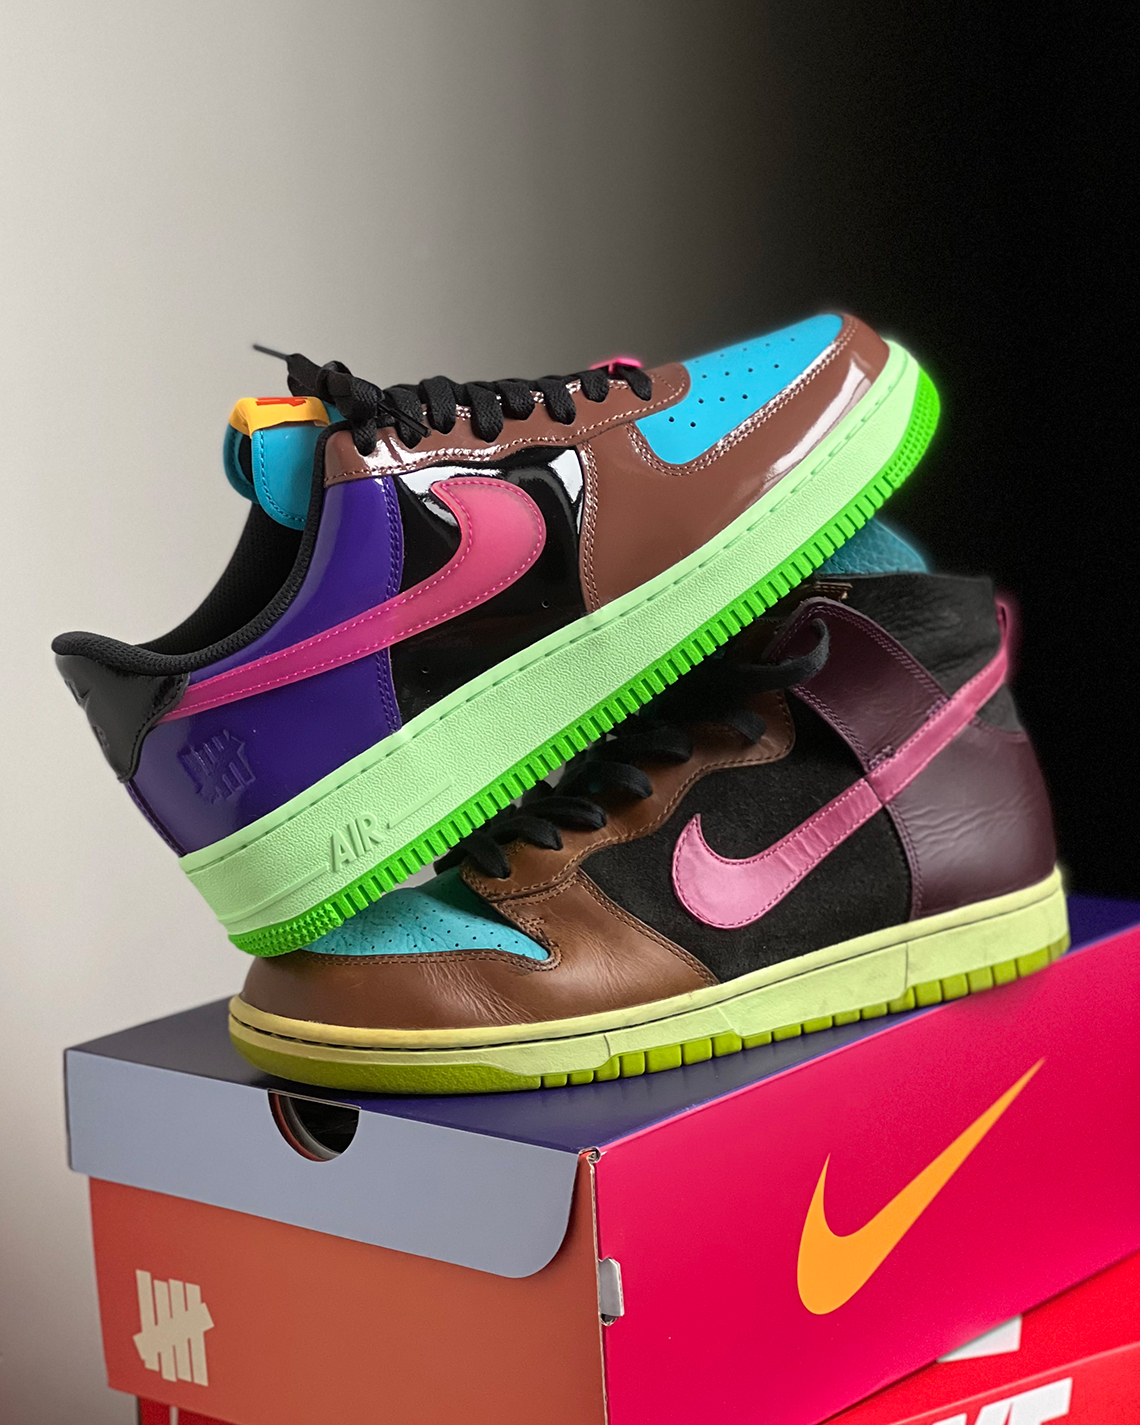 UNDEFEATED X NIKE AIR FORCE 1 LOW SP - FAUNABROWN/ PINK/ MULTI – Undefeated